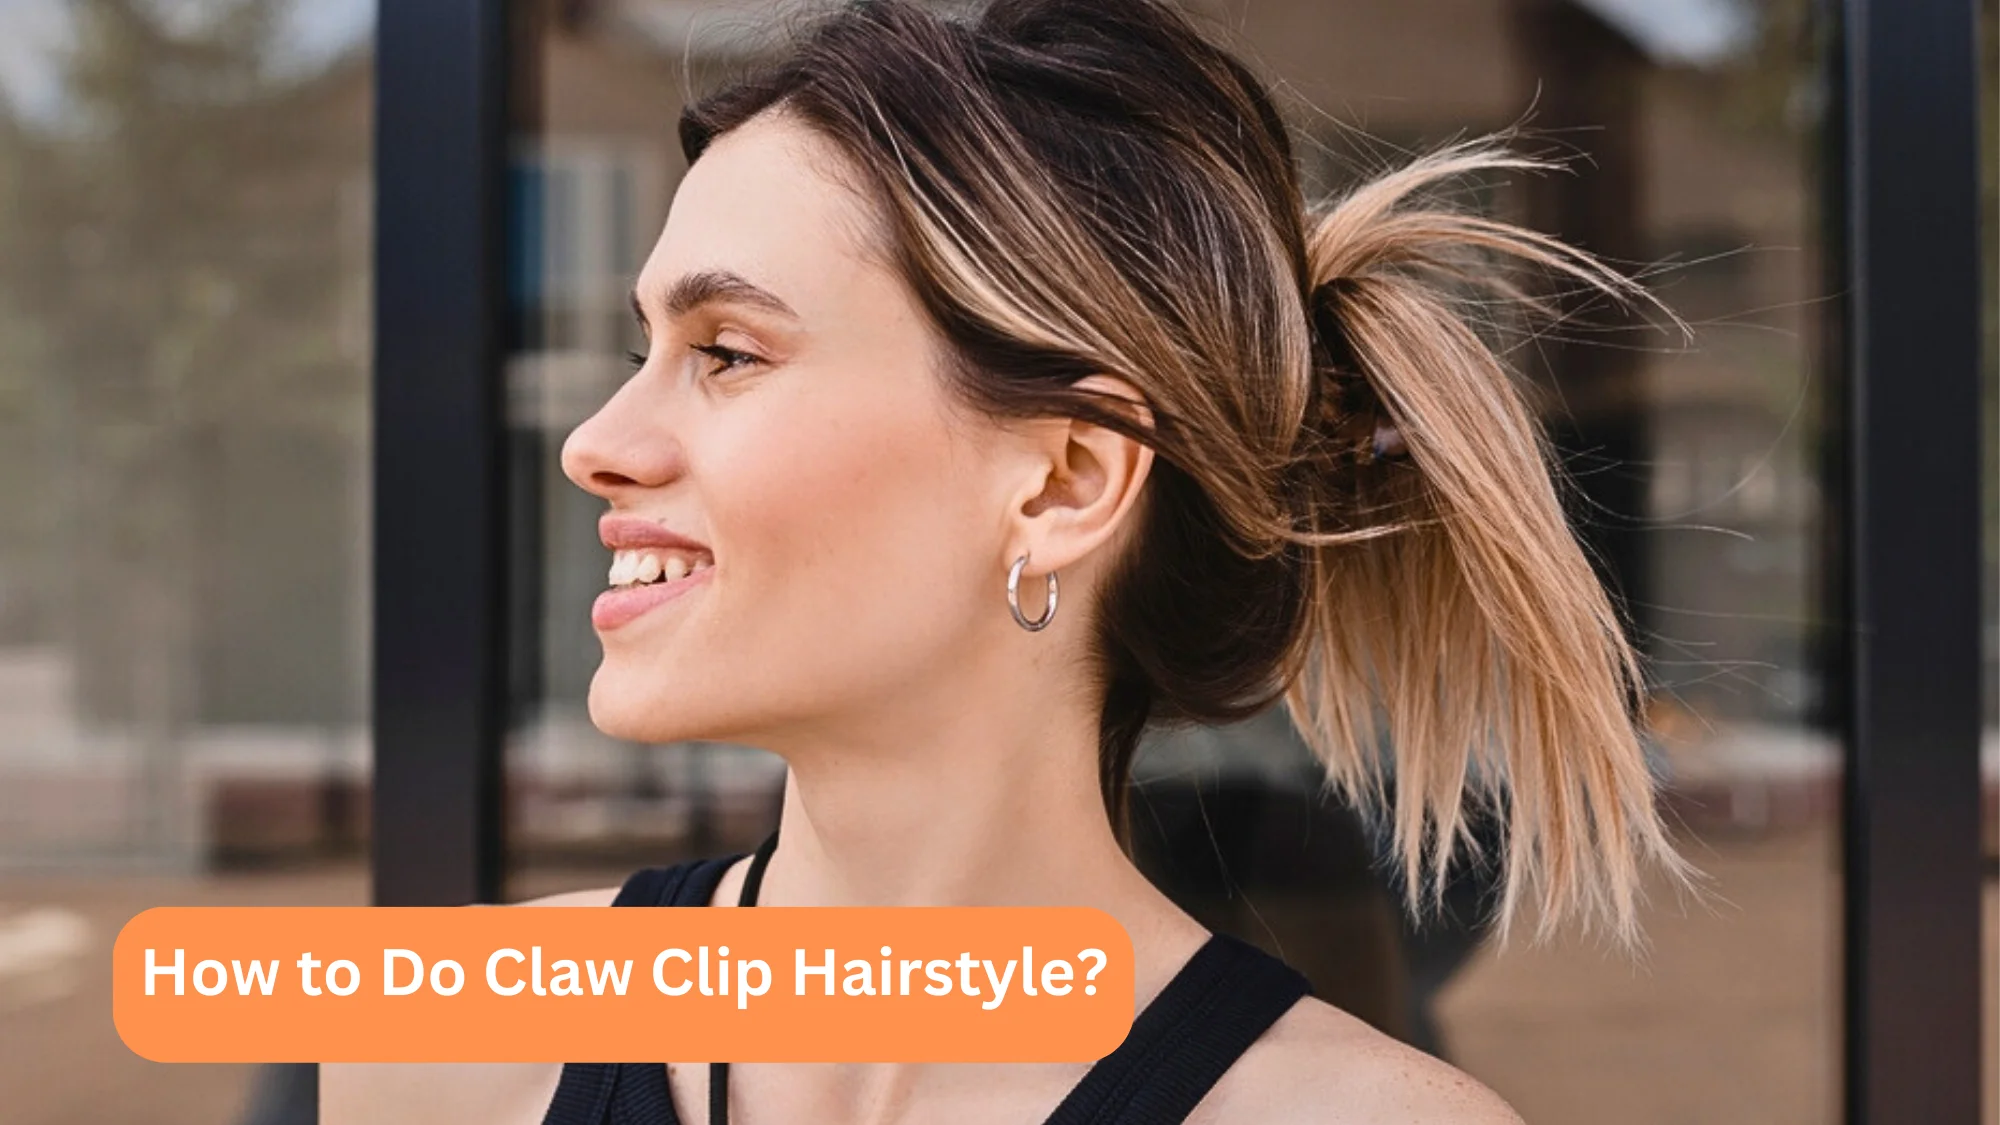 How to Do Claw Clip Hairstyle?